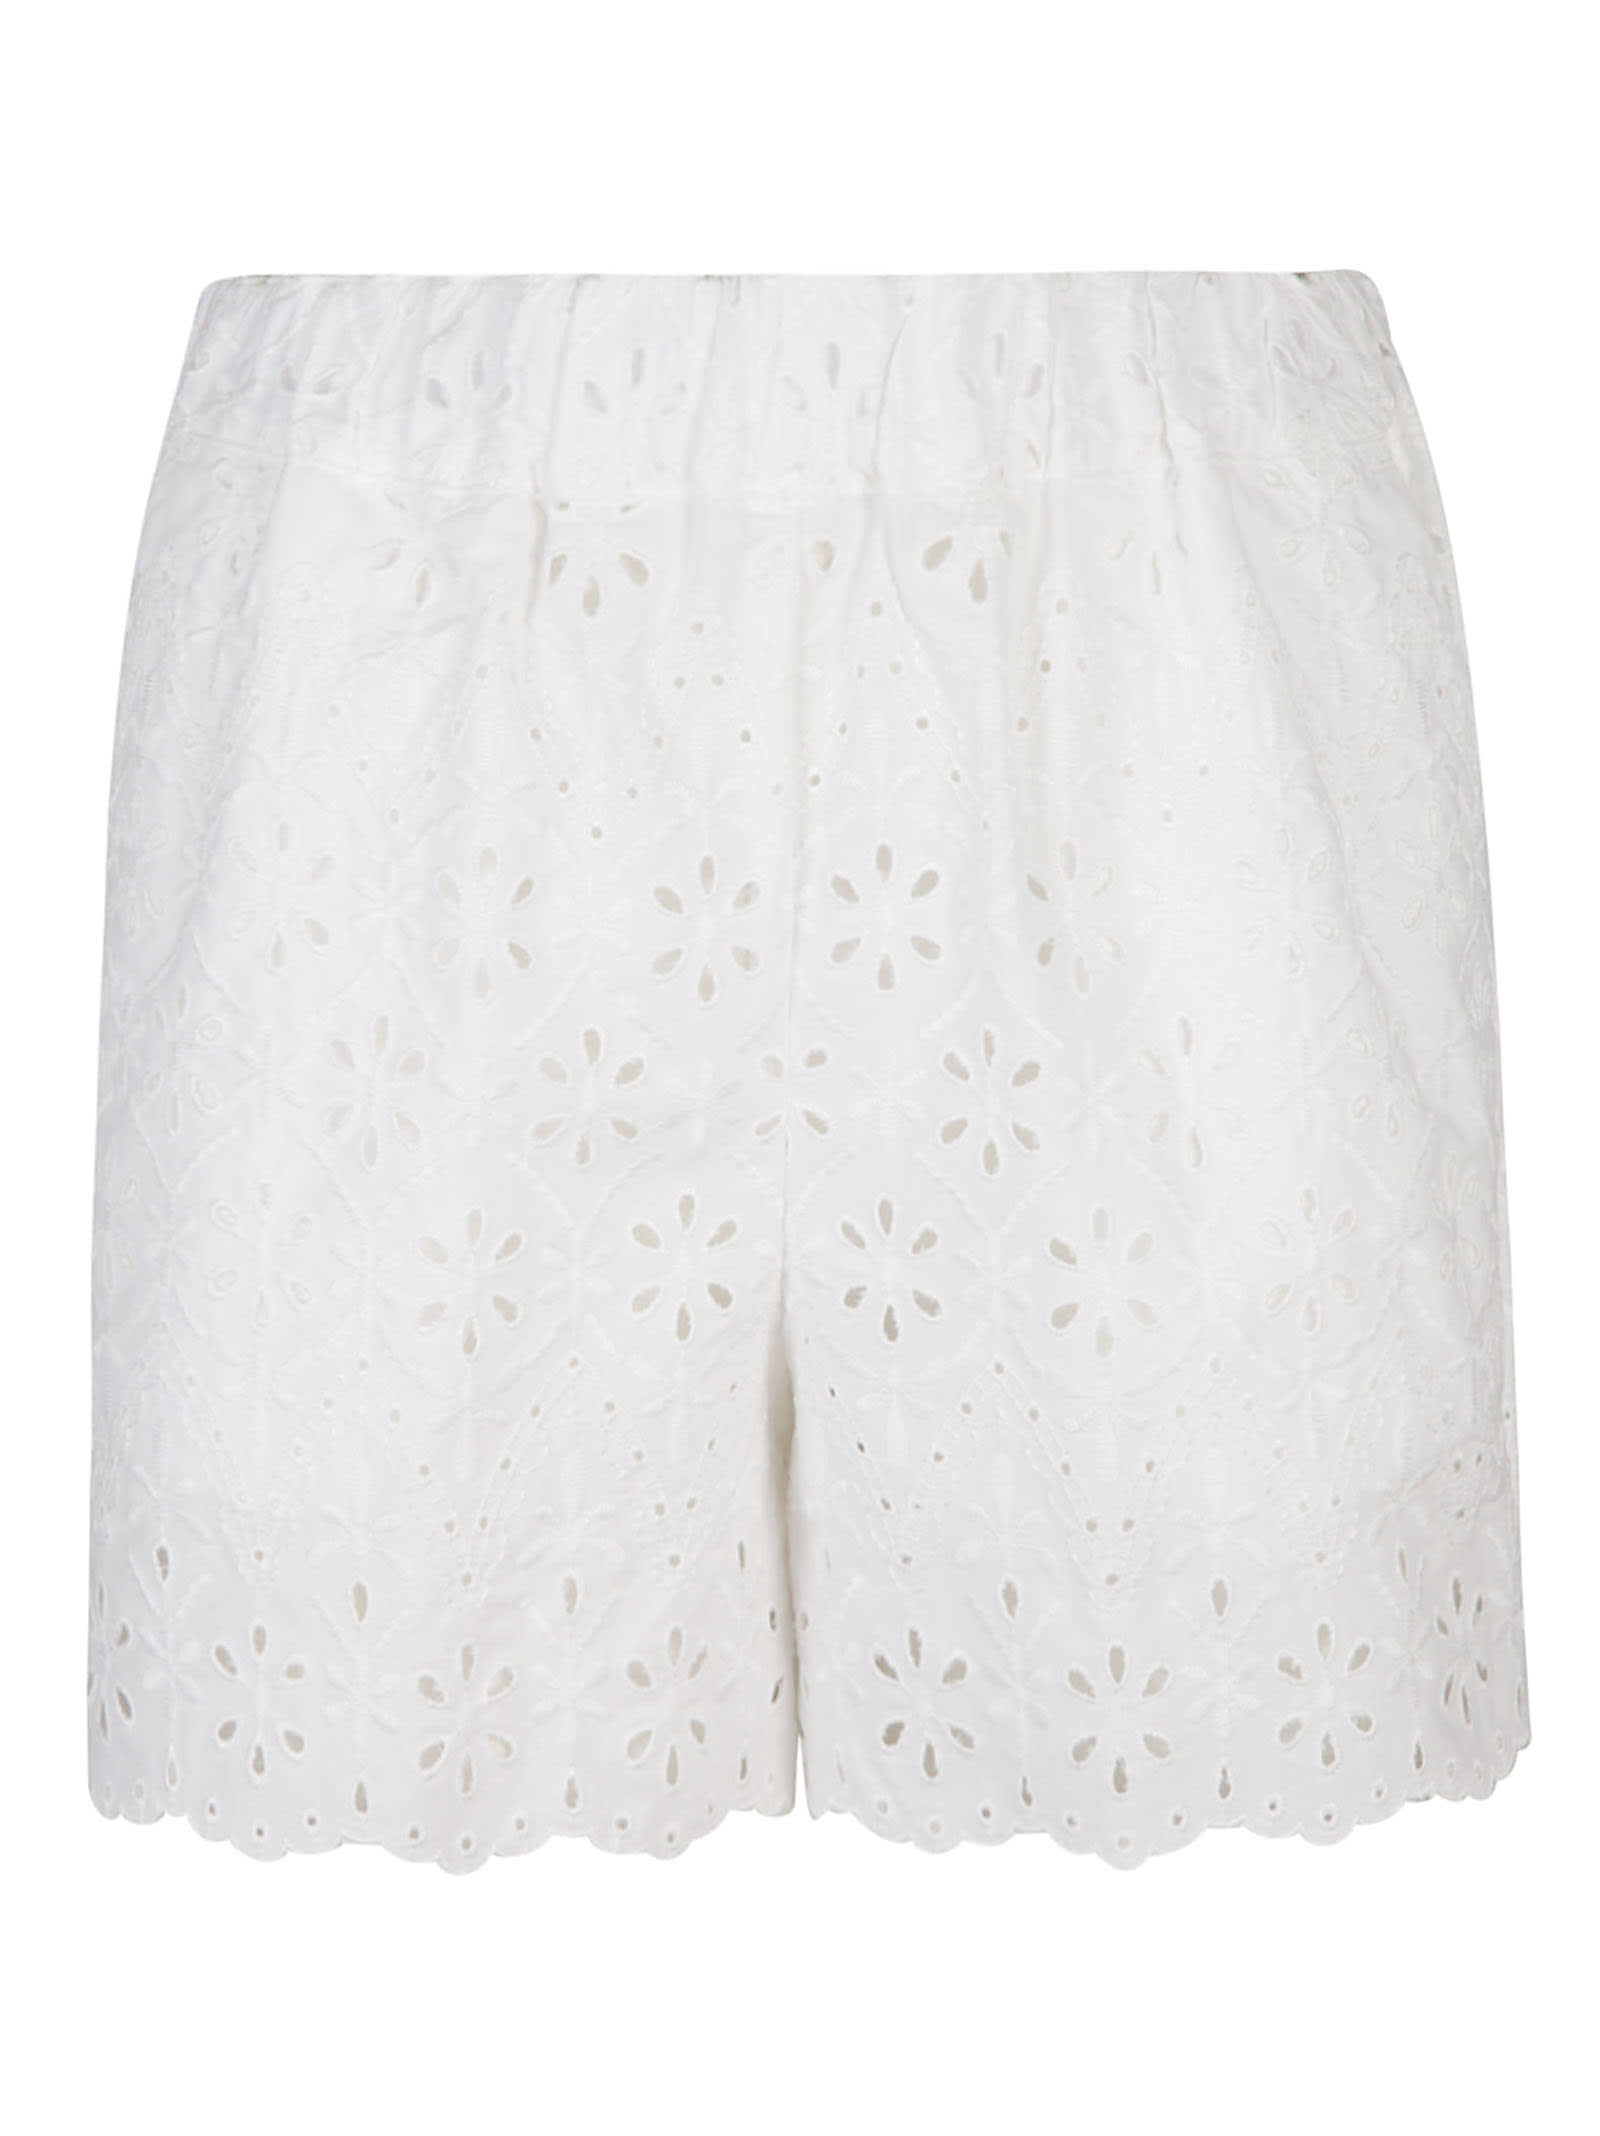 P.A.R.O.S.H PERFORATED FLORAL SHORTS,CURCUMAD210092 001 BIANCO